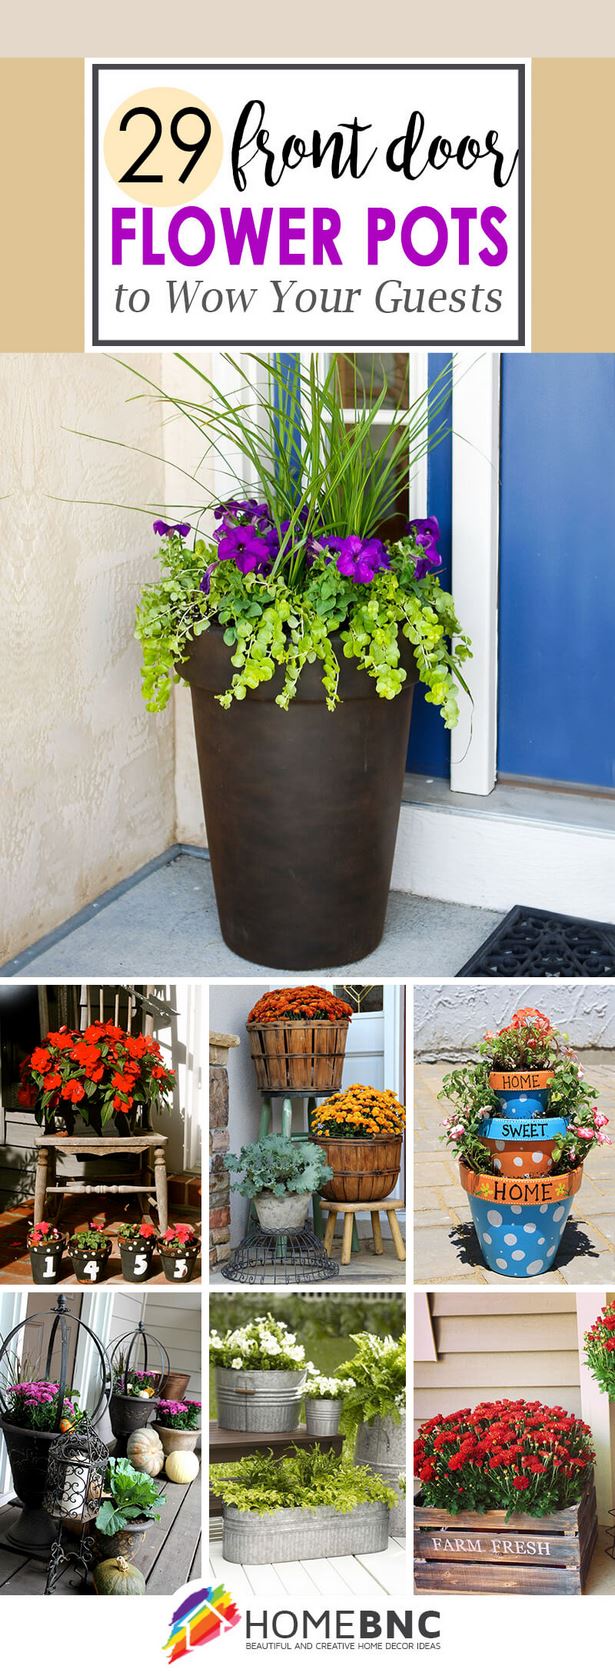 flower-ideas-for-containers-48_10 Цветни идеи за контейнери